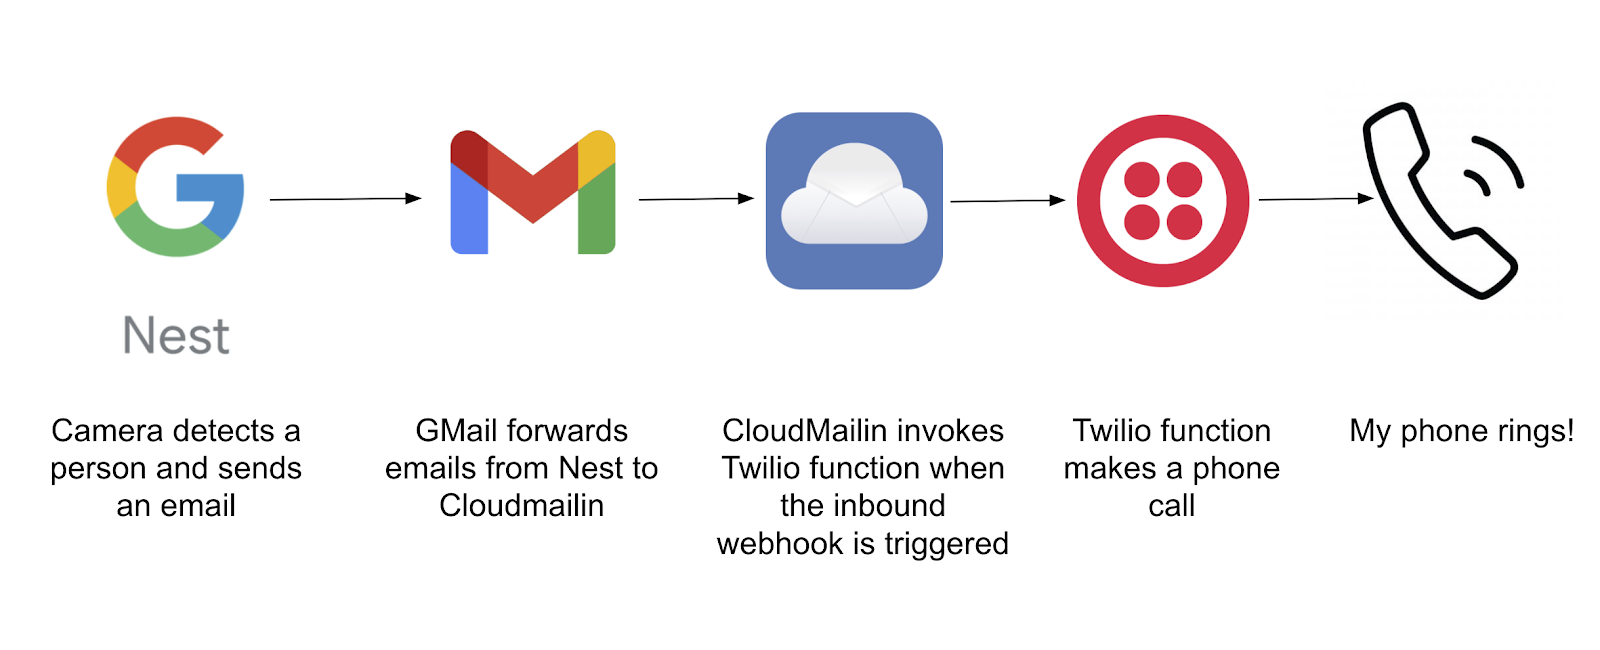 FlowChart: Google Nest Camera detects a person and sends an email; GMail Forards emails from Nest to CloudMailin; CloudMailin invokes Twilio function when the inbound webhook is triggered; Twilio function makes a phone call; My phone rings